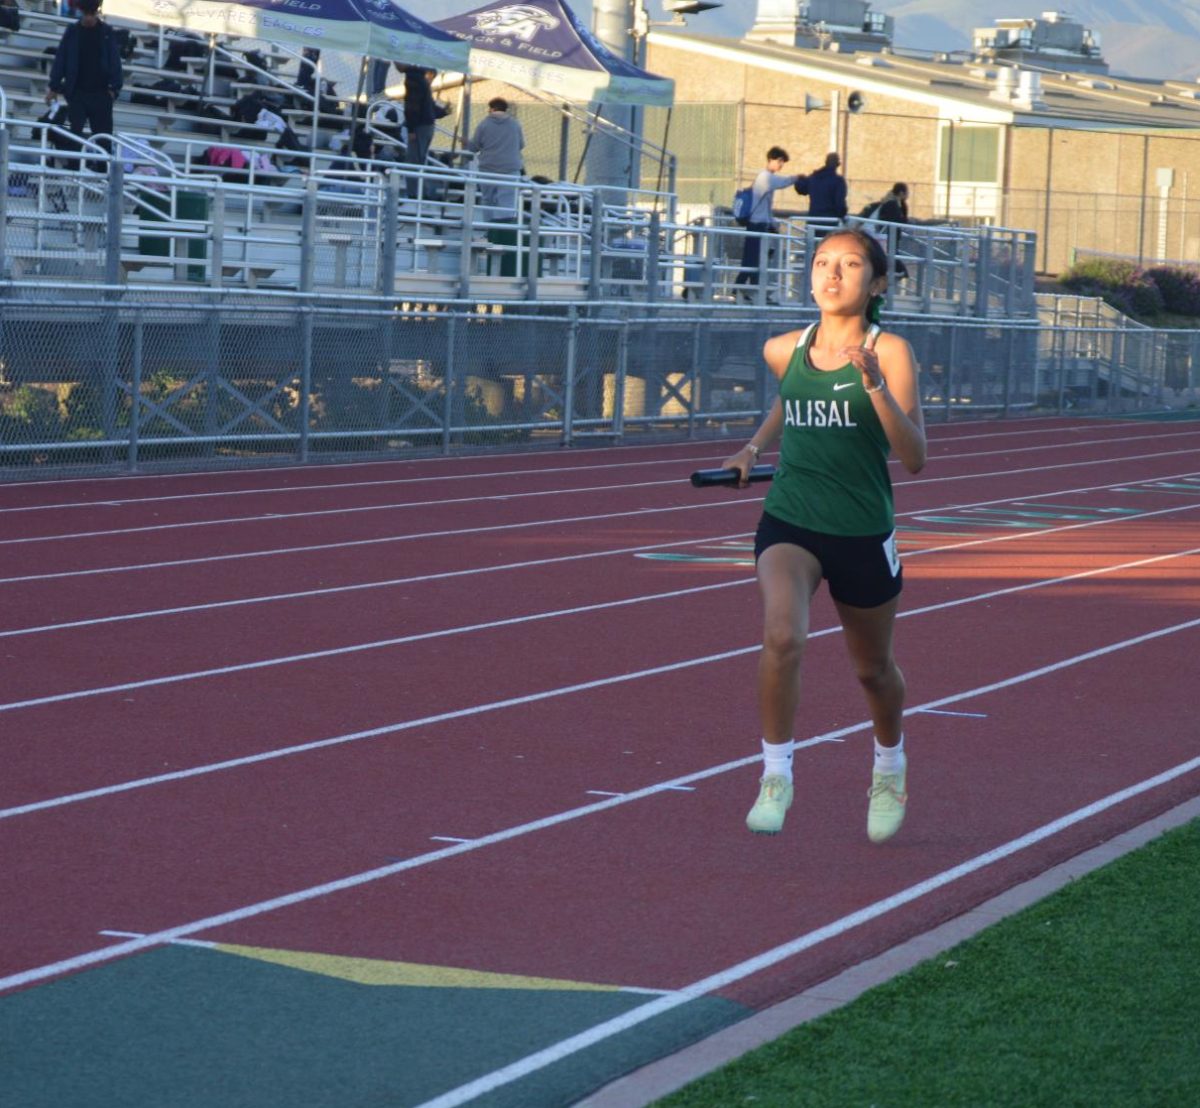 Starting the season strong
in the 4x400 relay at the Salinas City invitational, freshman
Yaretzi Cornelio anchored and helped the team finish 1st, with
a time of 4:43.58. The team ran a season best 4:26.19 in the
home meet versus Alvarez on March 19th, beating them by 20
seconds. According to Coach Munoz, Cornelio has made the
top 20 in school history in the 800, 1600, and 3200 as a
freshman.